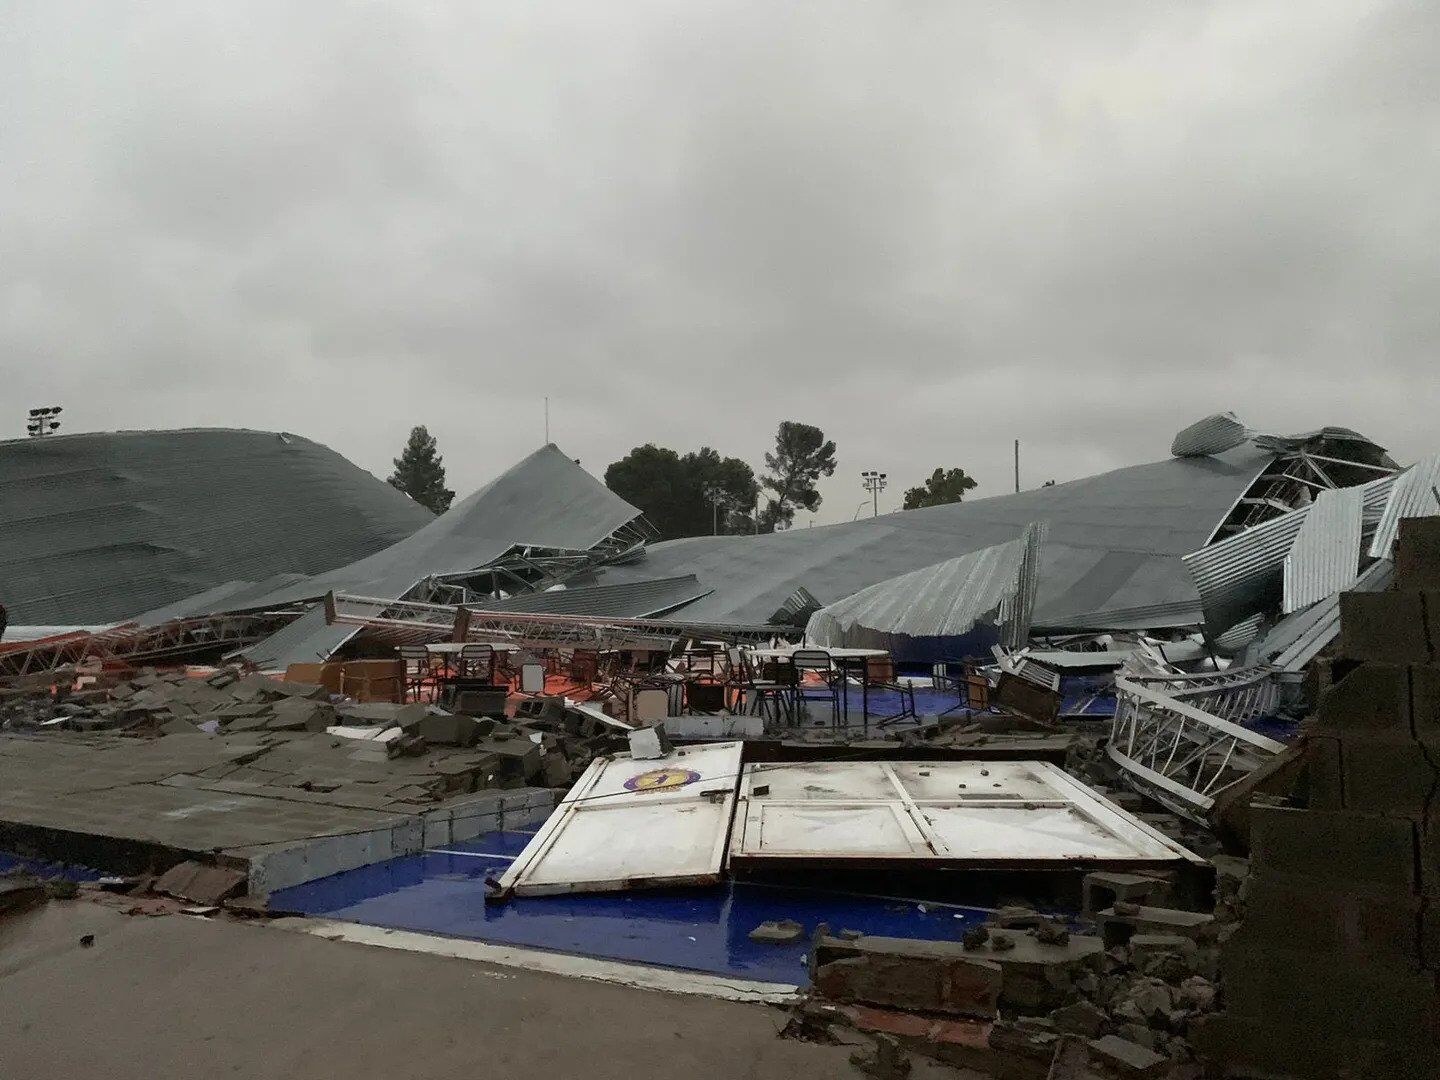 Hurricane collapses the roof of the sports club during a competition in Argentina, killing 13 people 